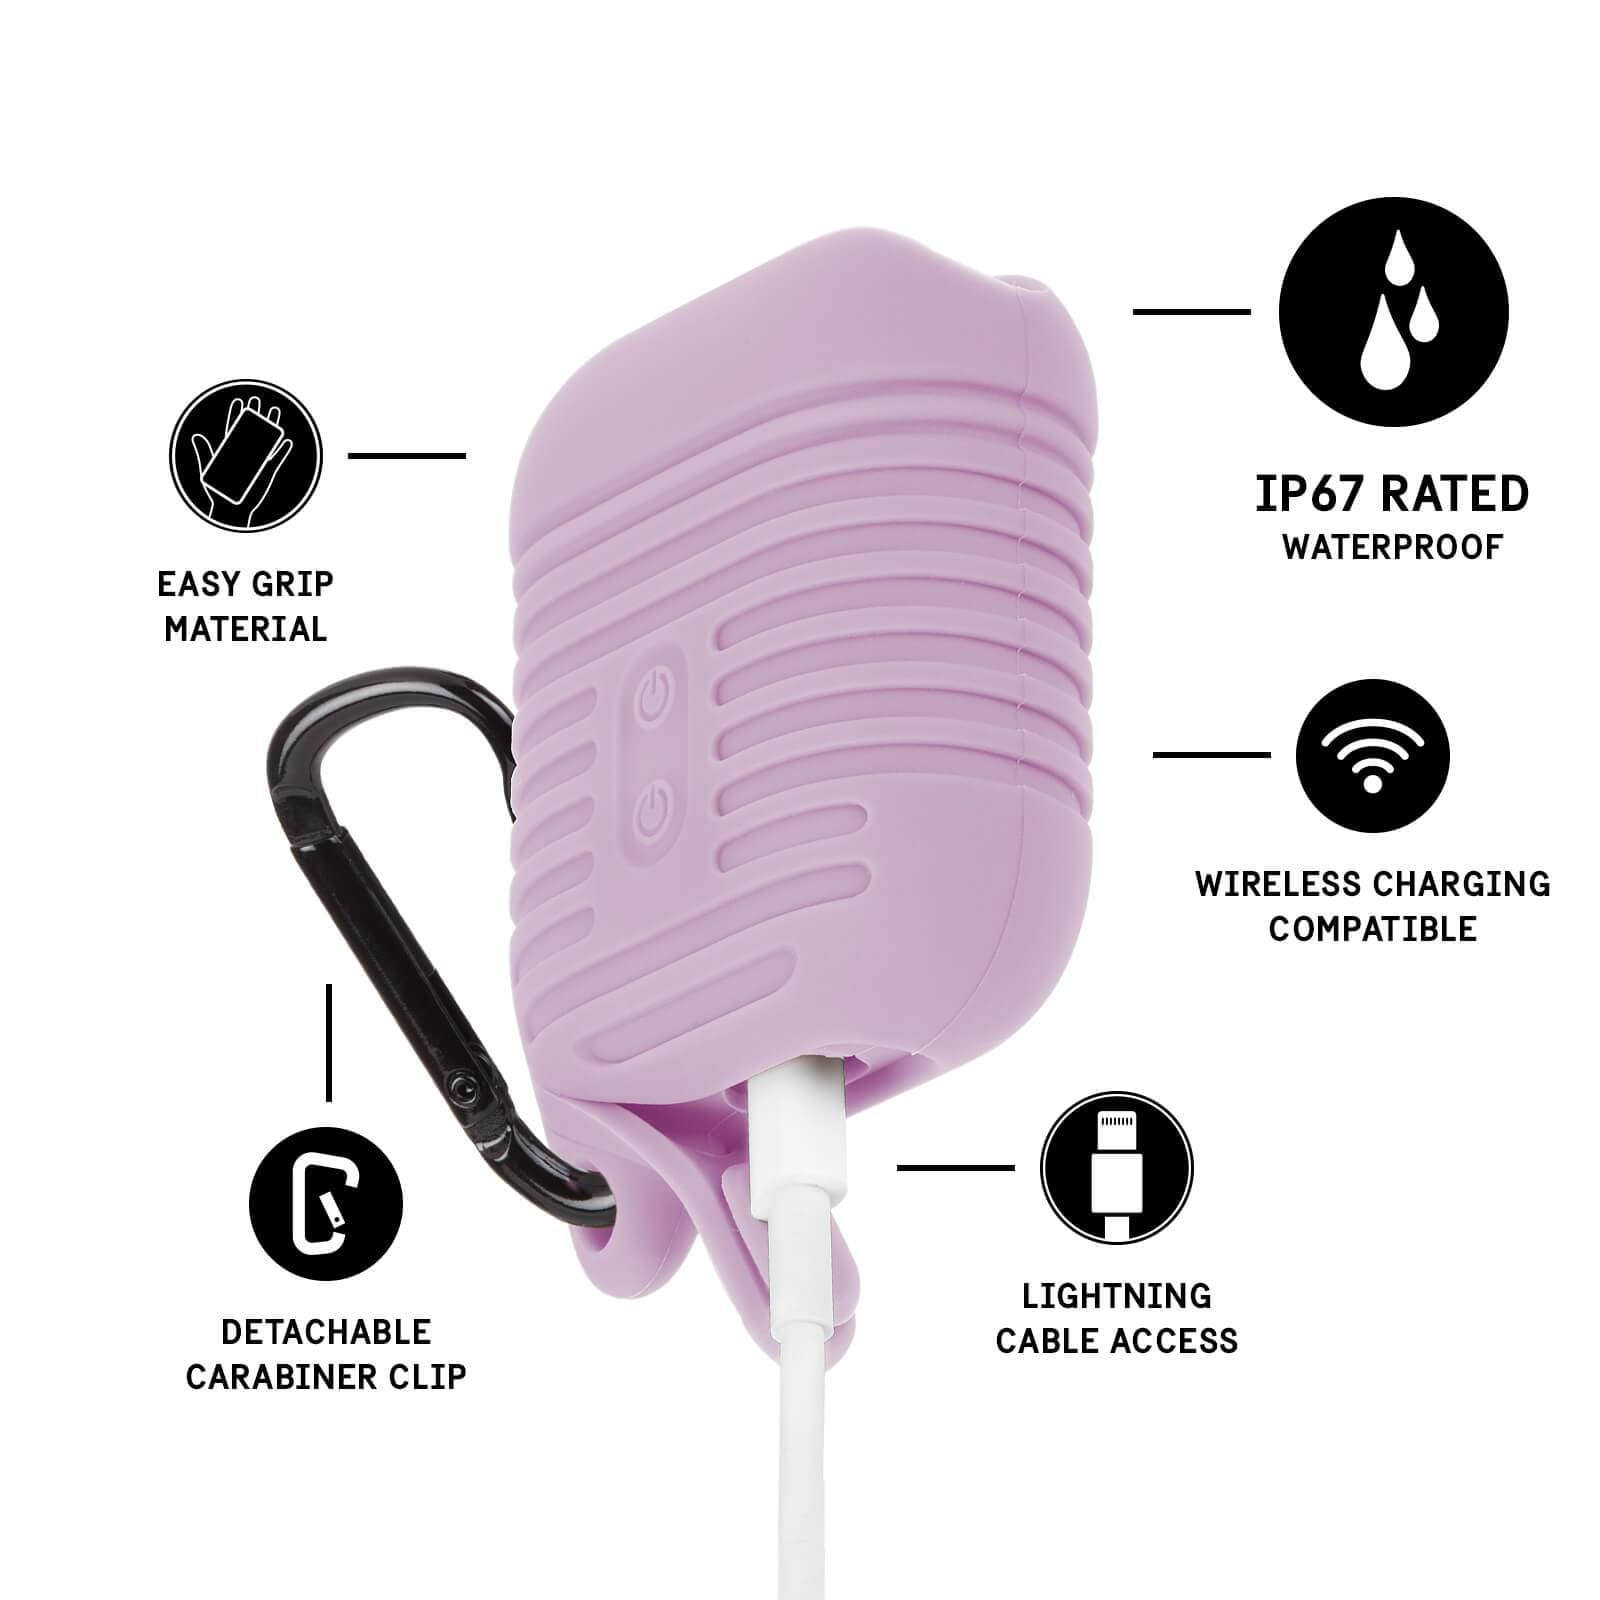 Features easy grip material, detachable carabiner clip, IP67 rated waterproof, wireless charging compatible, lightning cable access. color::Mauve